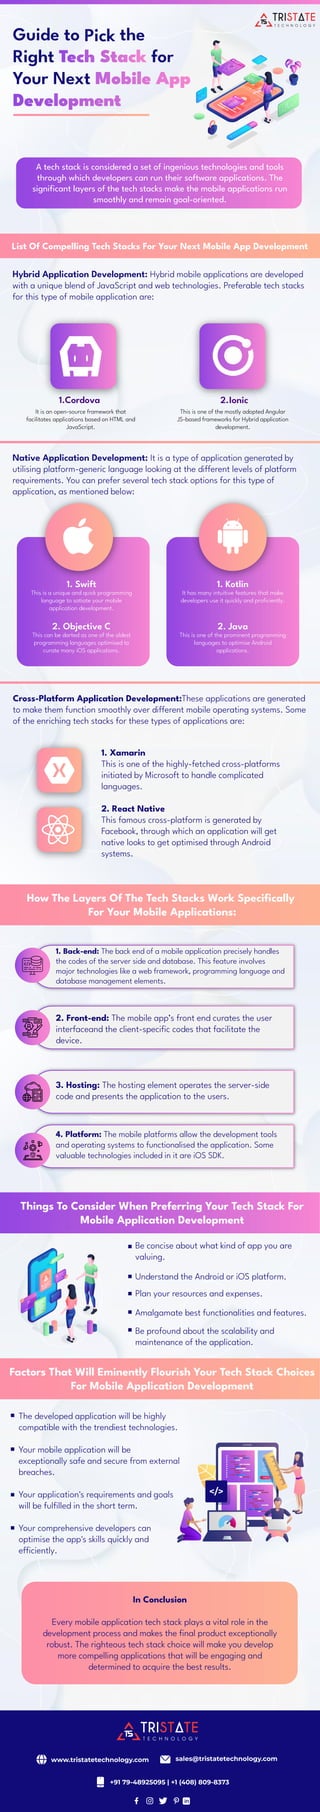 Guide to Pick the Right Tech Stack for Your Next Mobile App Development - Infographic